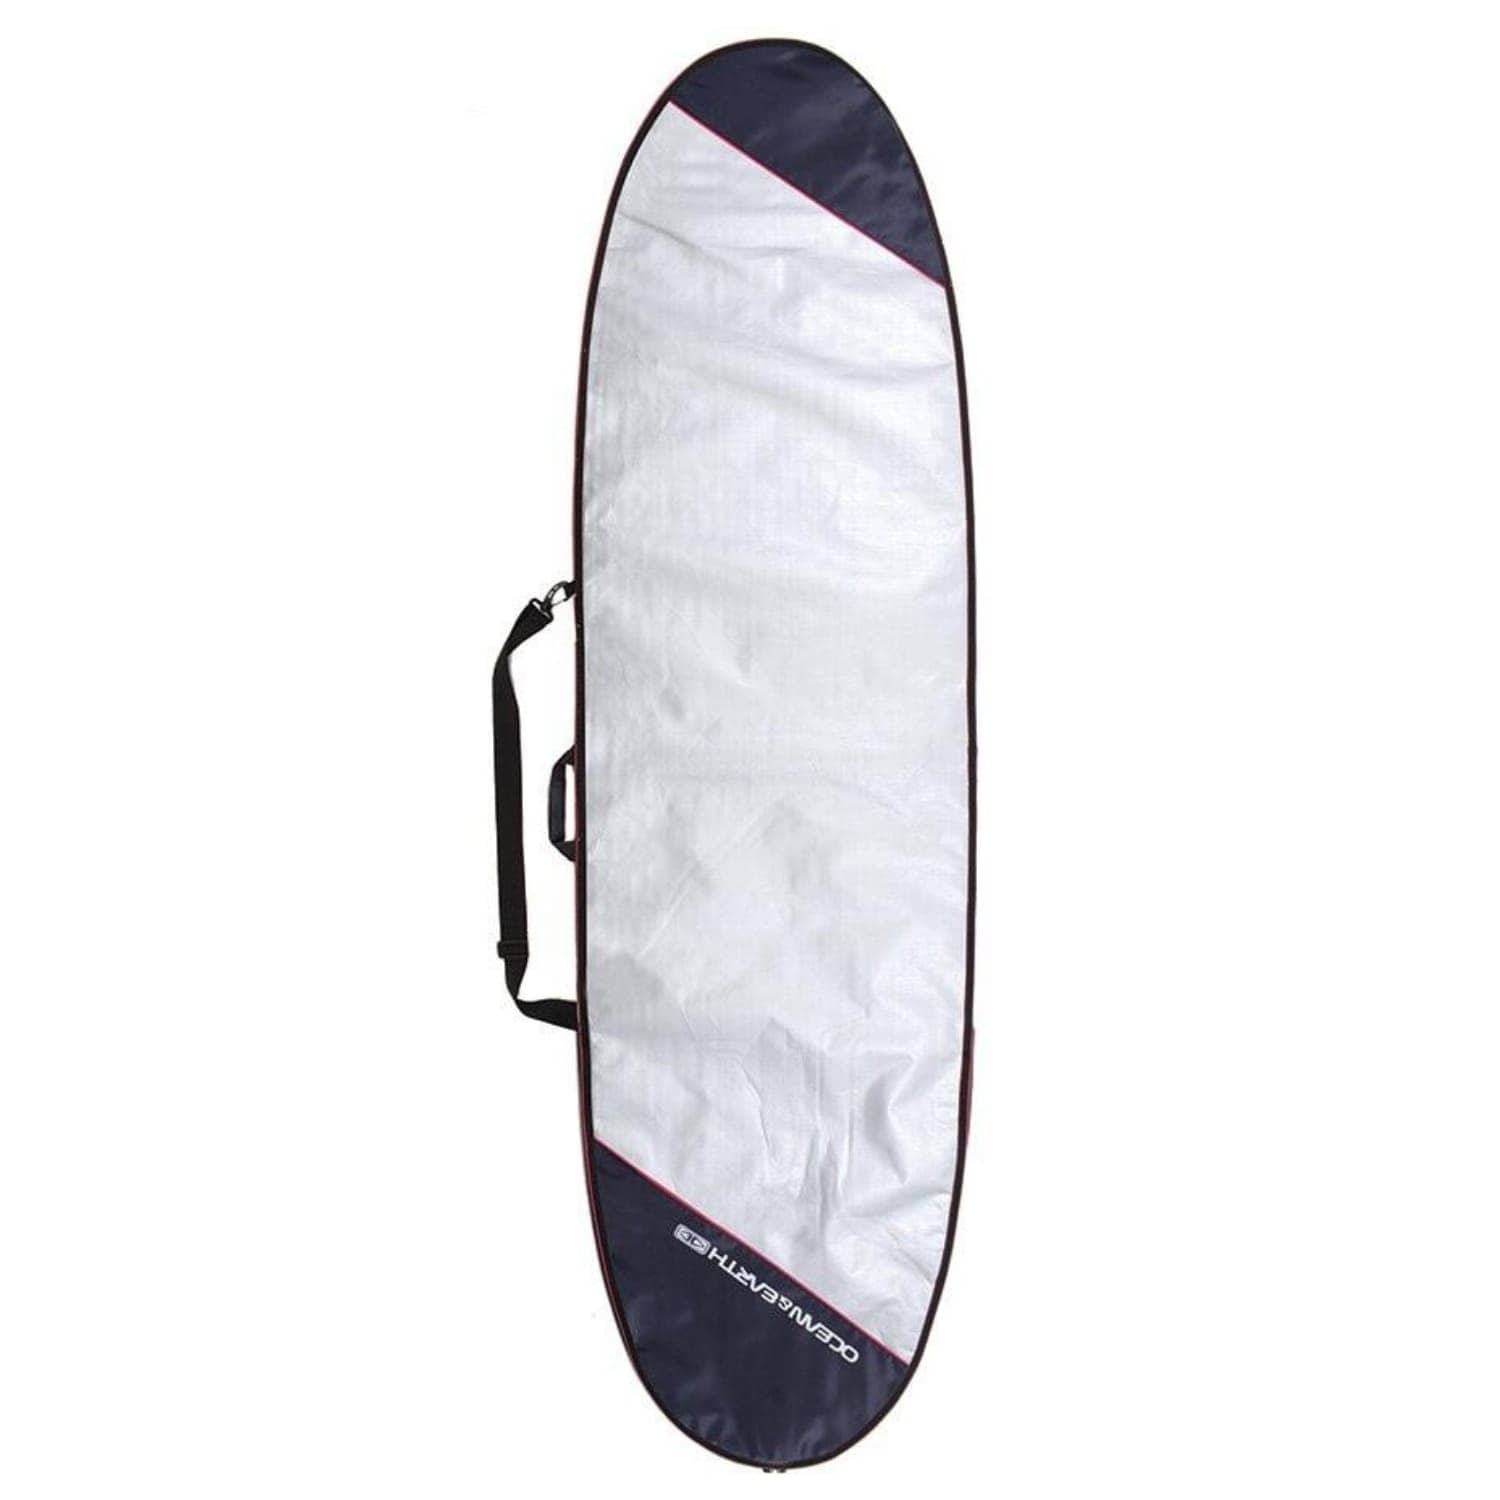 Ocean and Earth Barry Basic Longboard Cover Bag 2020 Silver / Red 8ft 6in - Longboard Surfboard Bag/Cover by Ocean and Earth